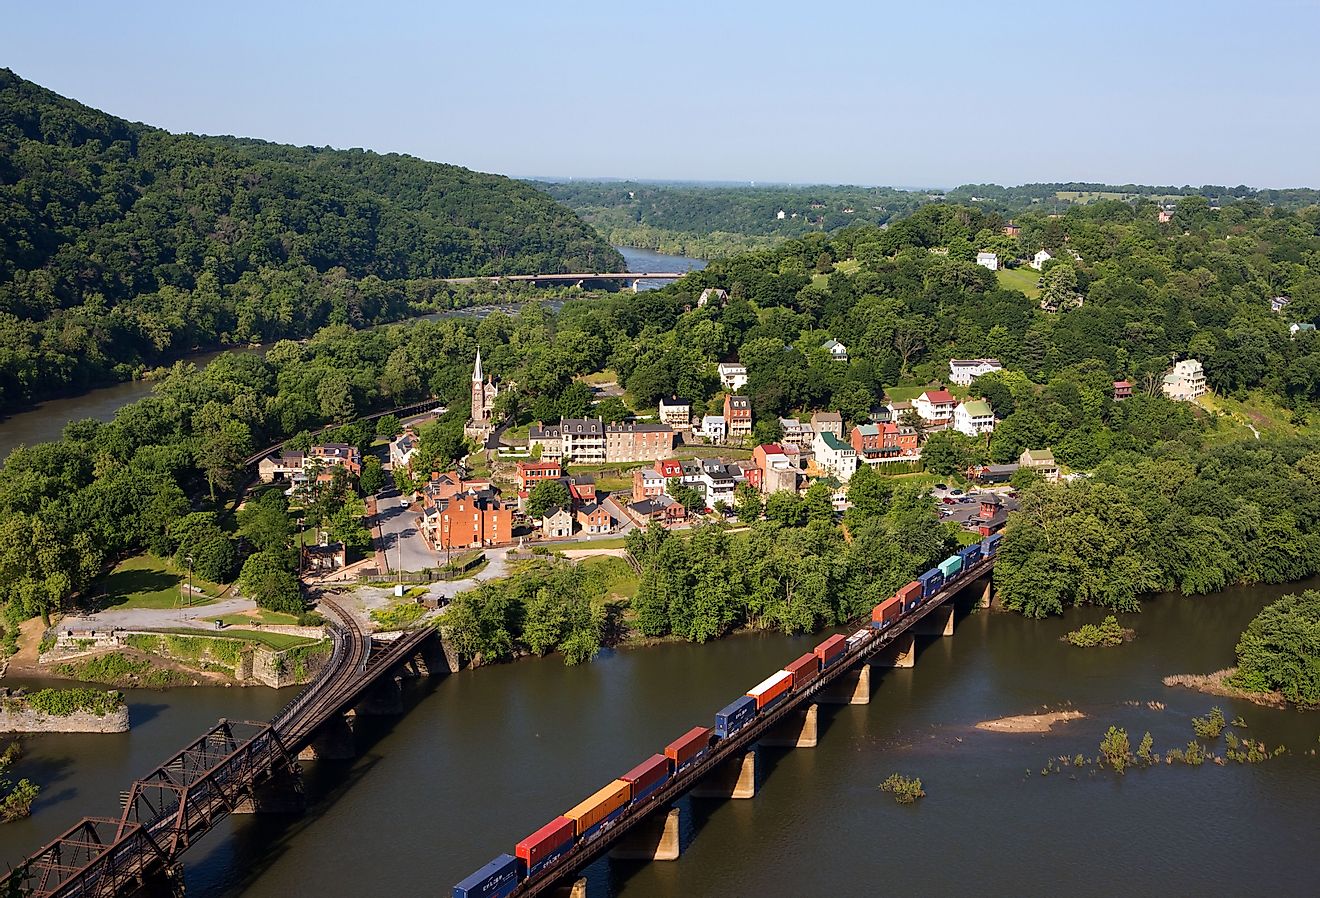 A train rolls across the Shenandoah River in an aerial view of the town of Harpers Ferry, West Virginia.